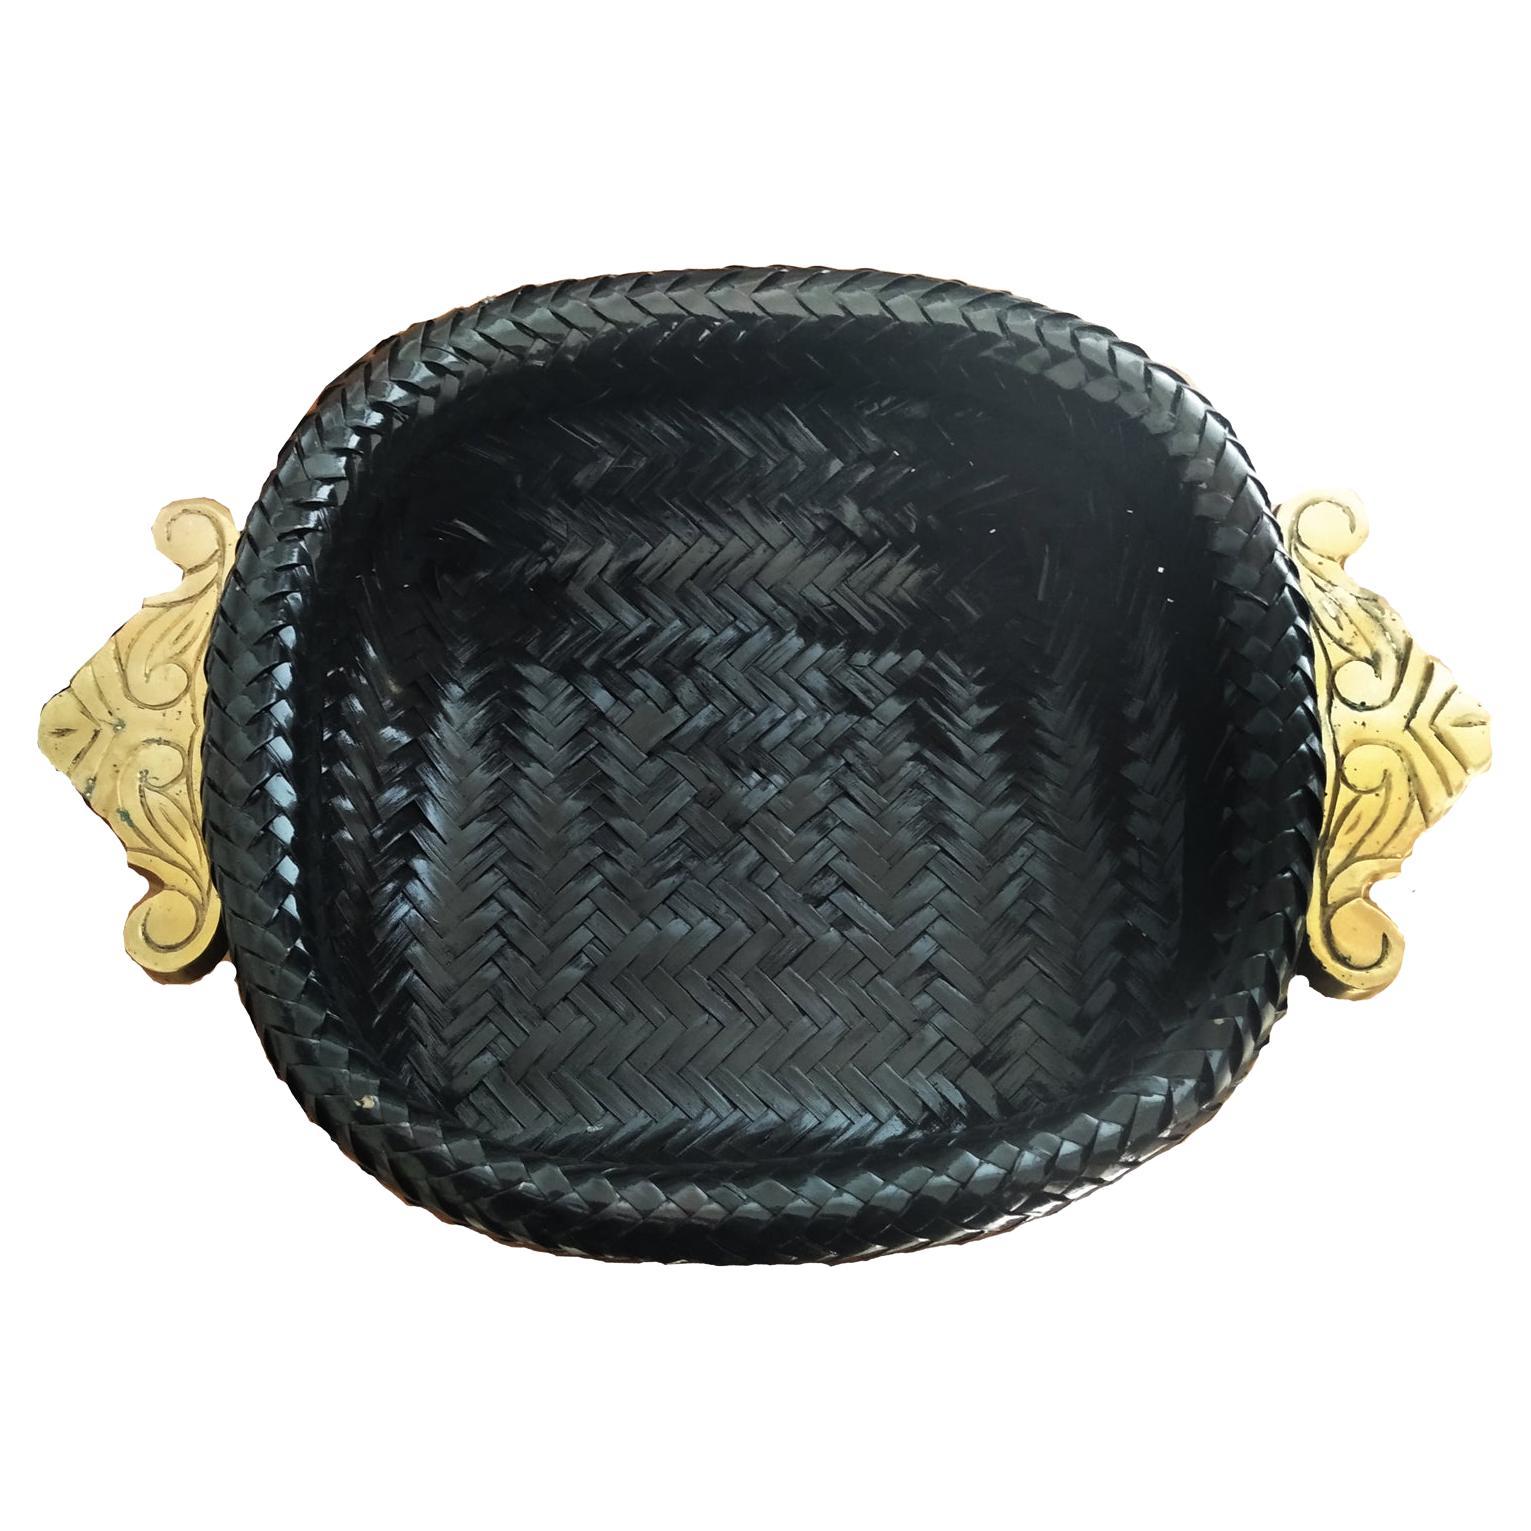 Trays Black Rattan and Brass Handles Oriental Origin 3 Pieces, Mid 20th Century For Sale 5